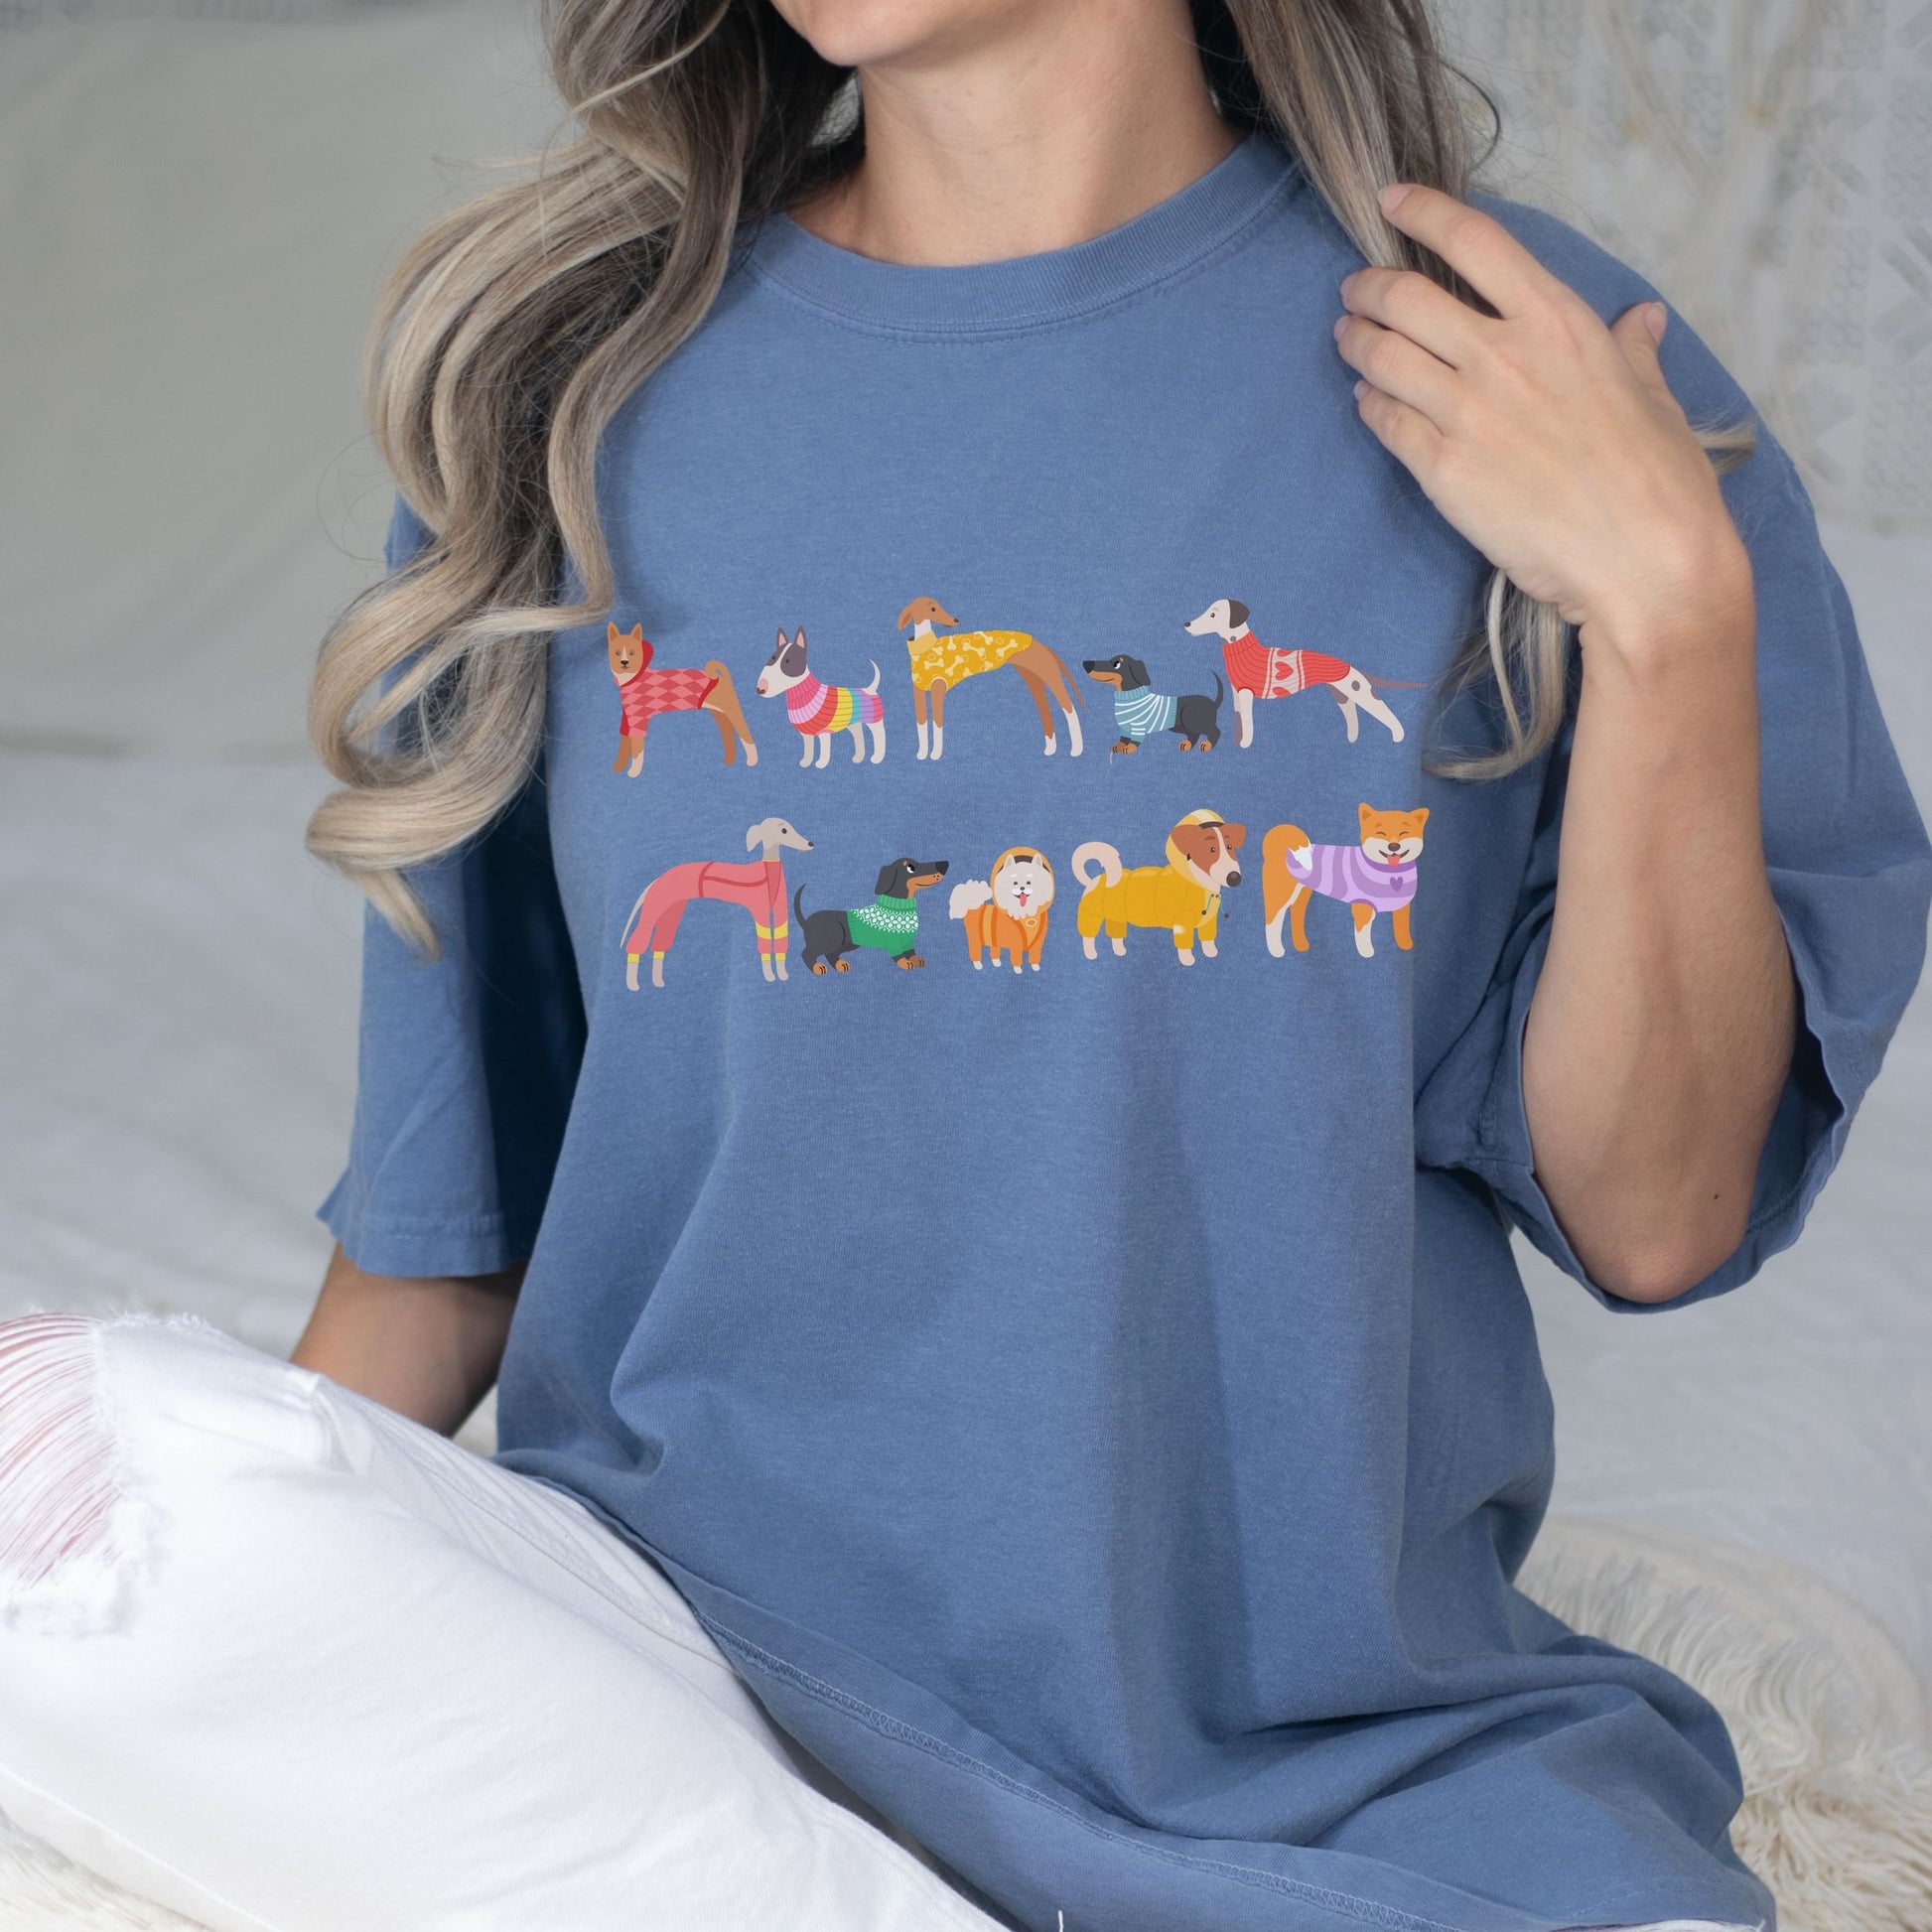 Dogs in Sweaters Comfort Colors Shirt, Sweater Dog Graphic Tee, Dog Shirts for Women, Teenage Girl Gifts, Dog Lover Dogcore Preppy Stuff